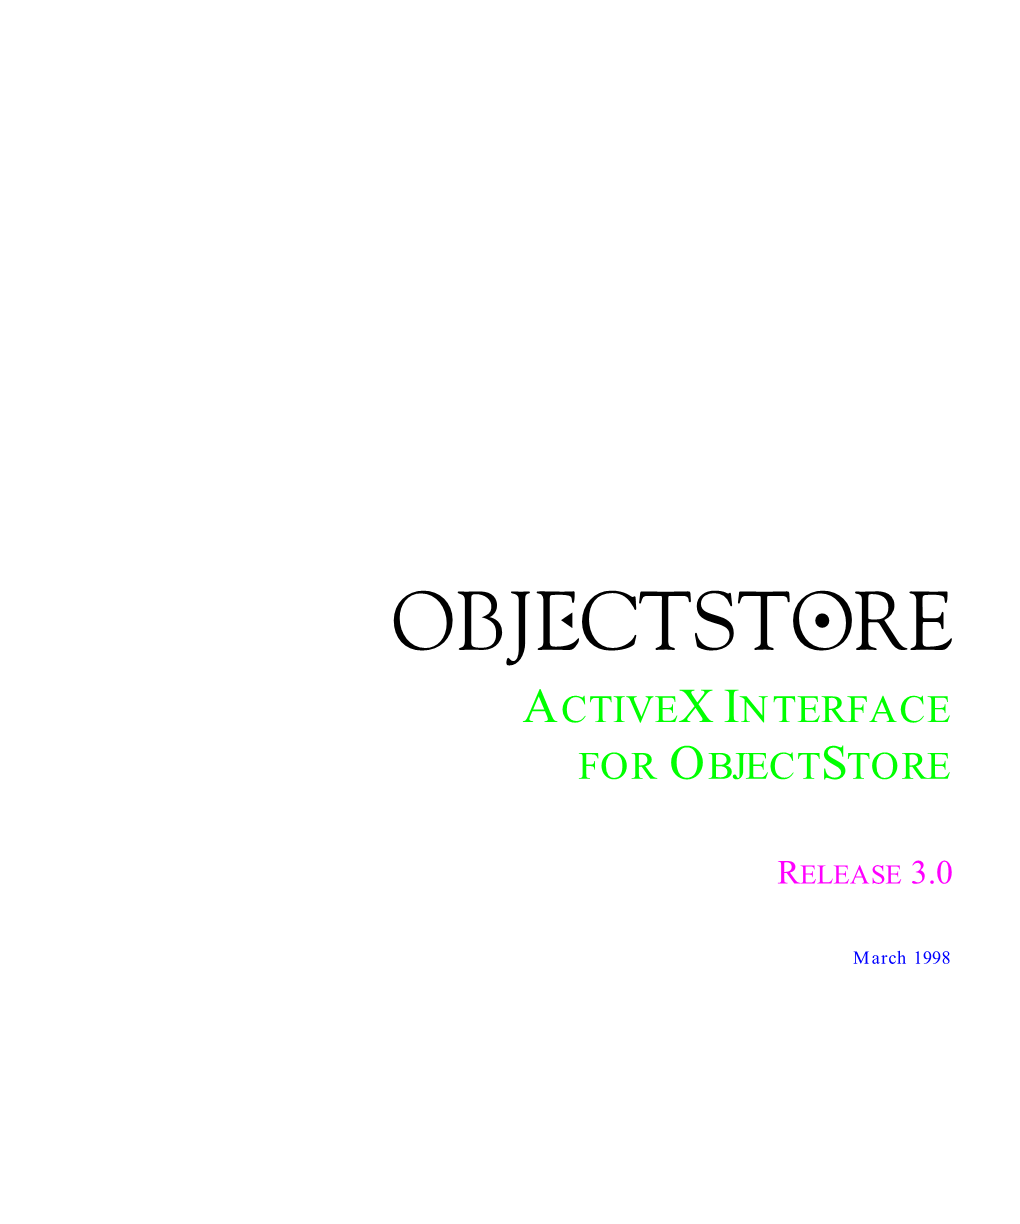 Activex Interface for Objectstore